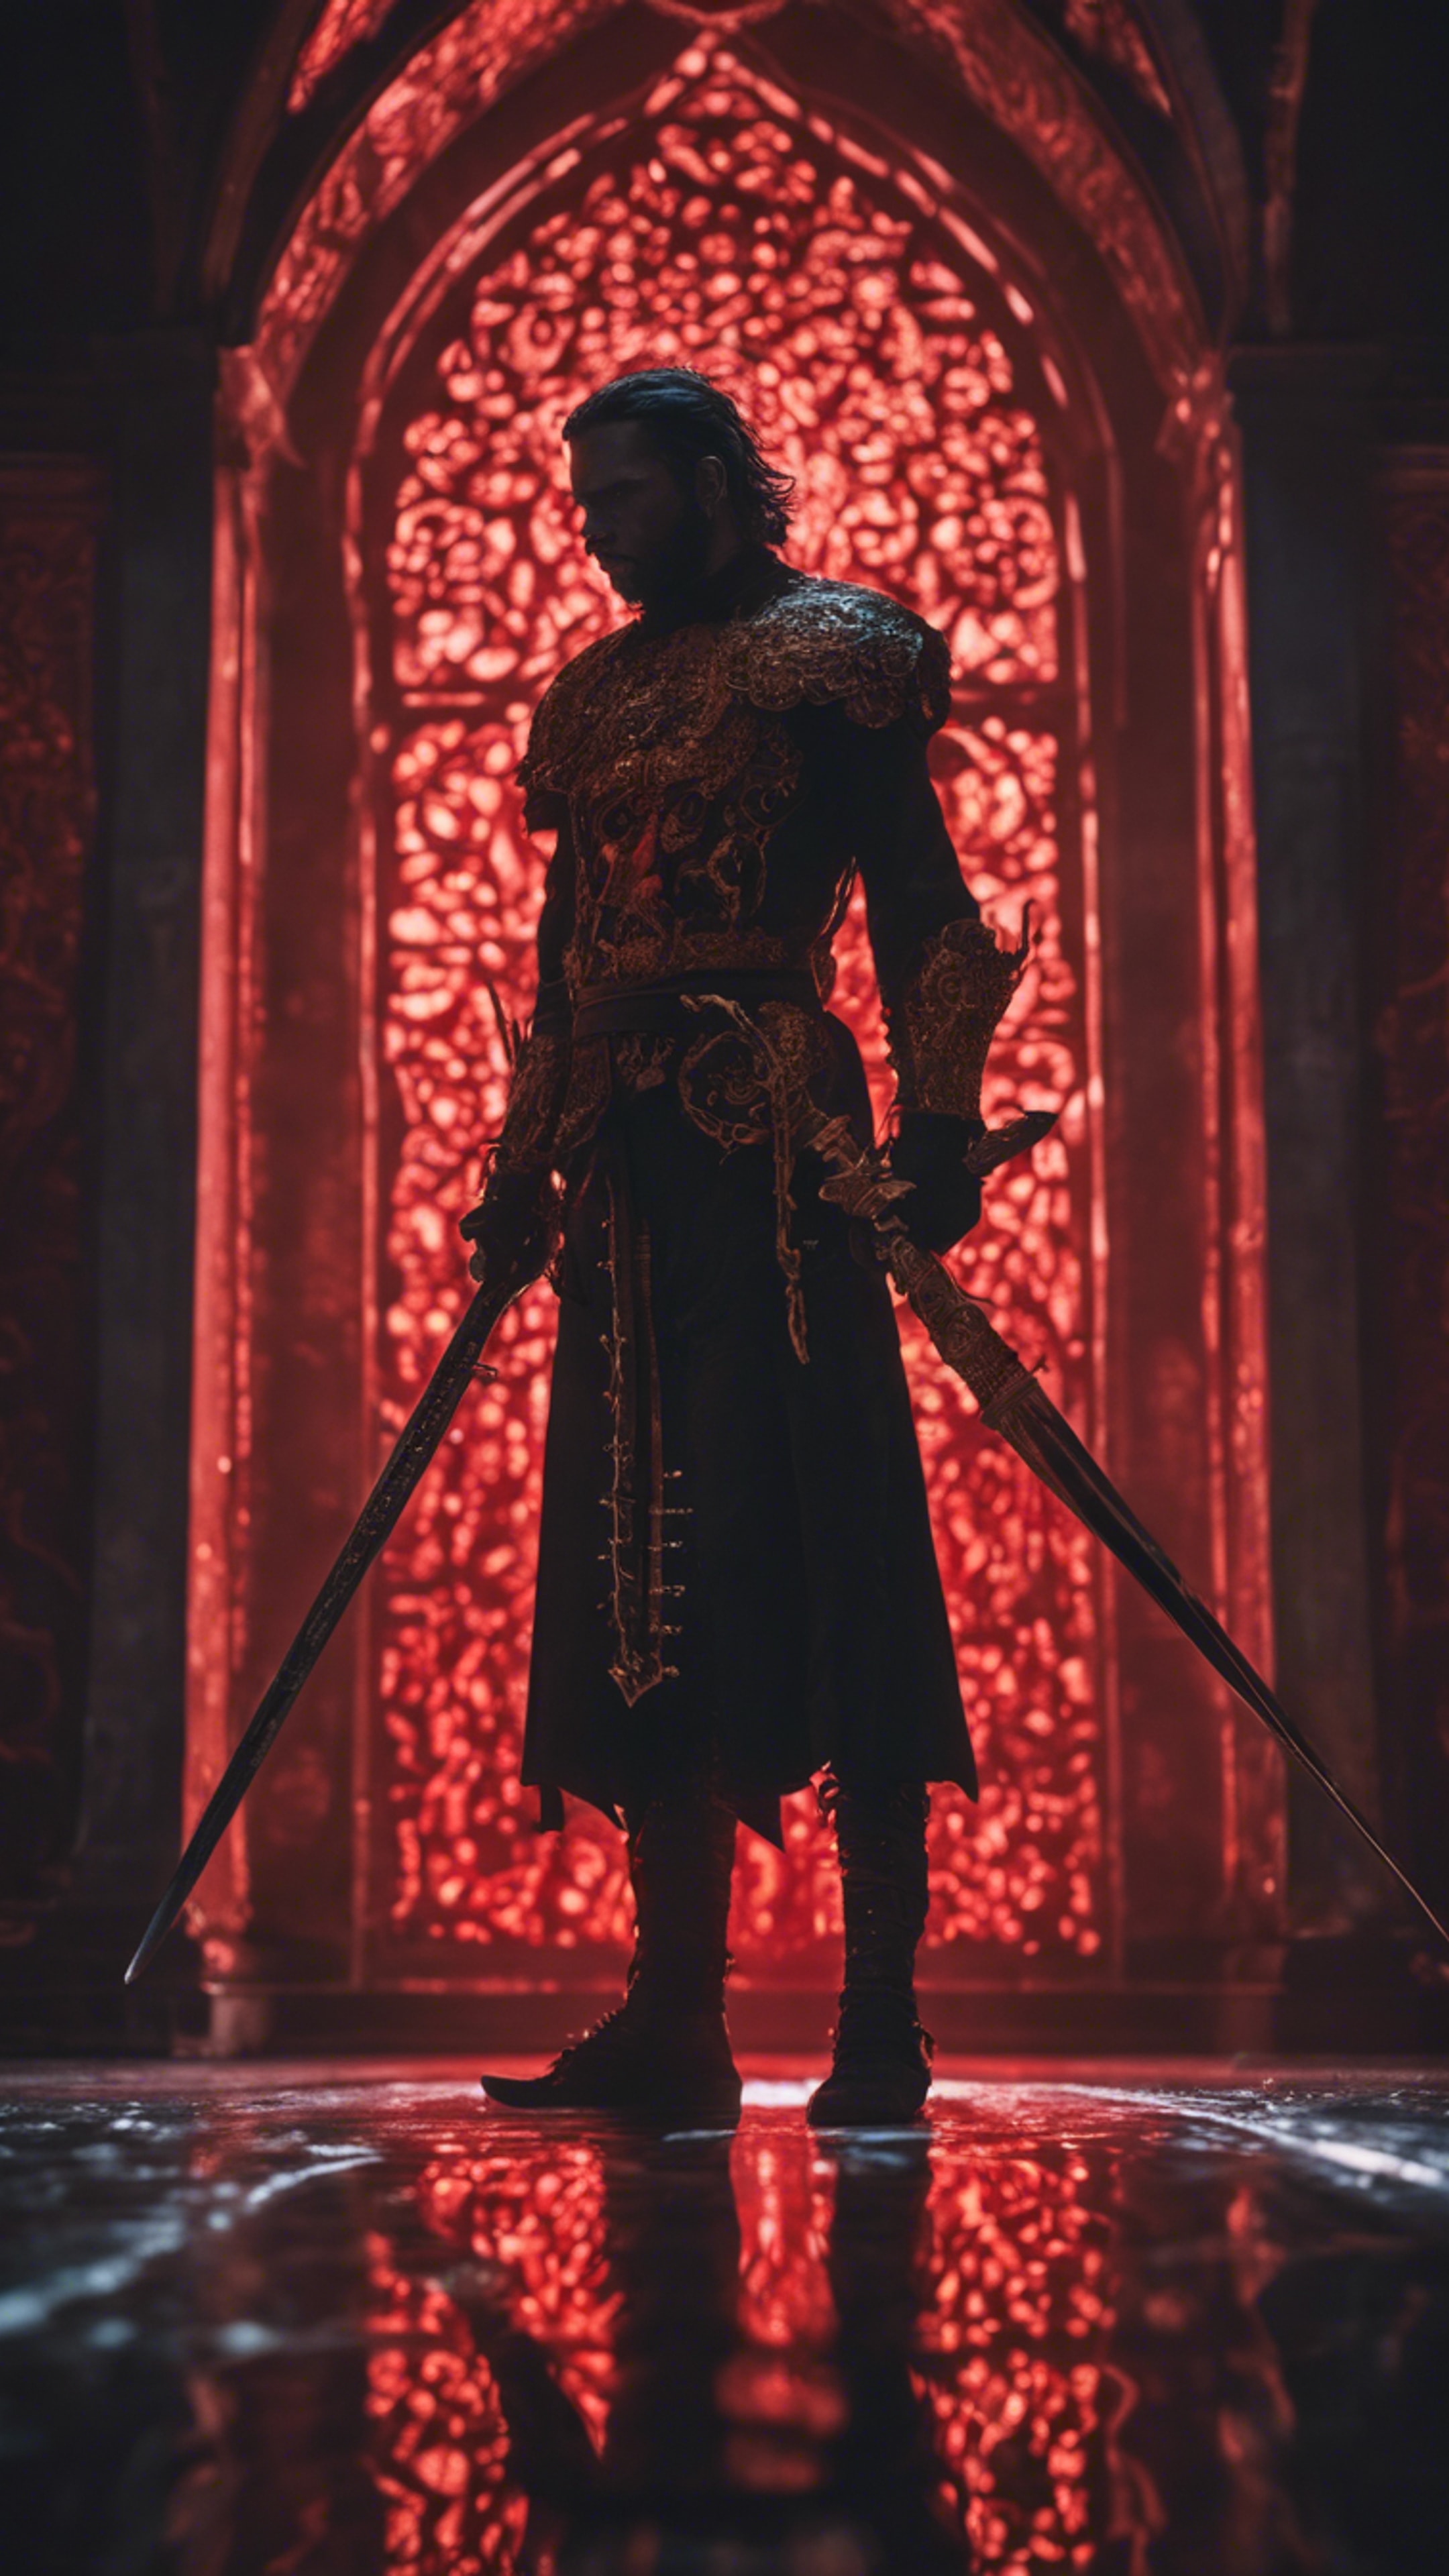 A Gothic warrior, his silhouette bathed in a concoction of red and gold light, striking a pose with his ornate sword. Wallpaper[9fad715962214be9bd04]